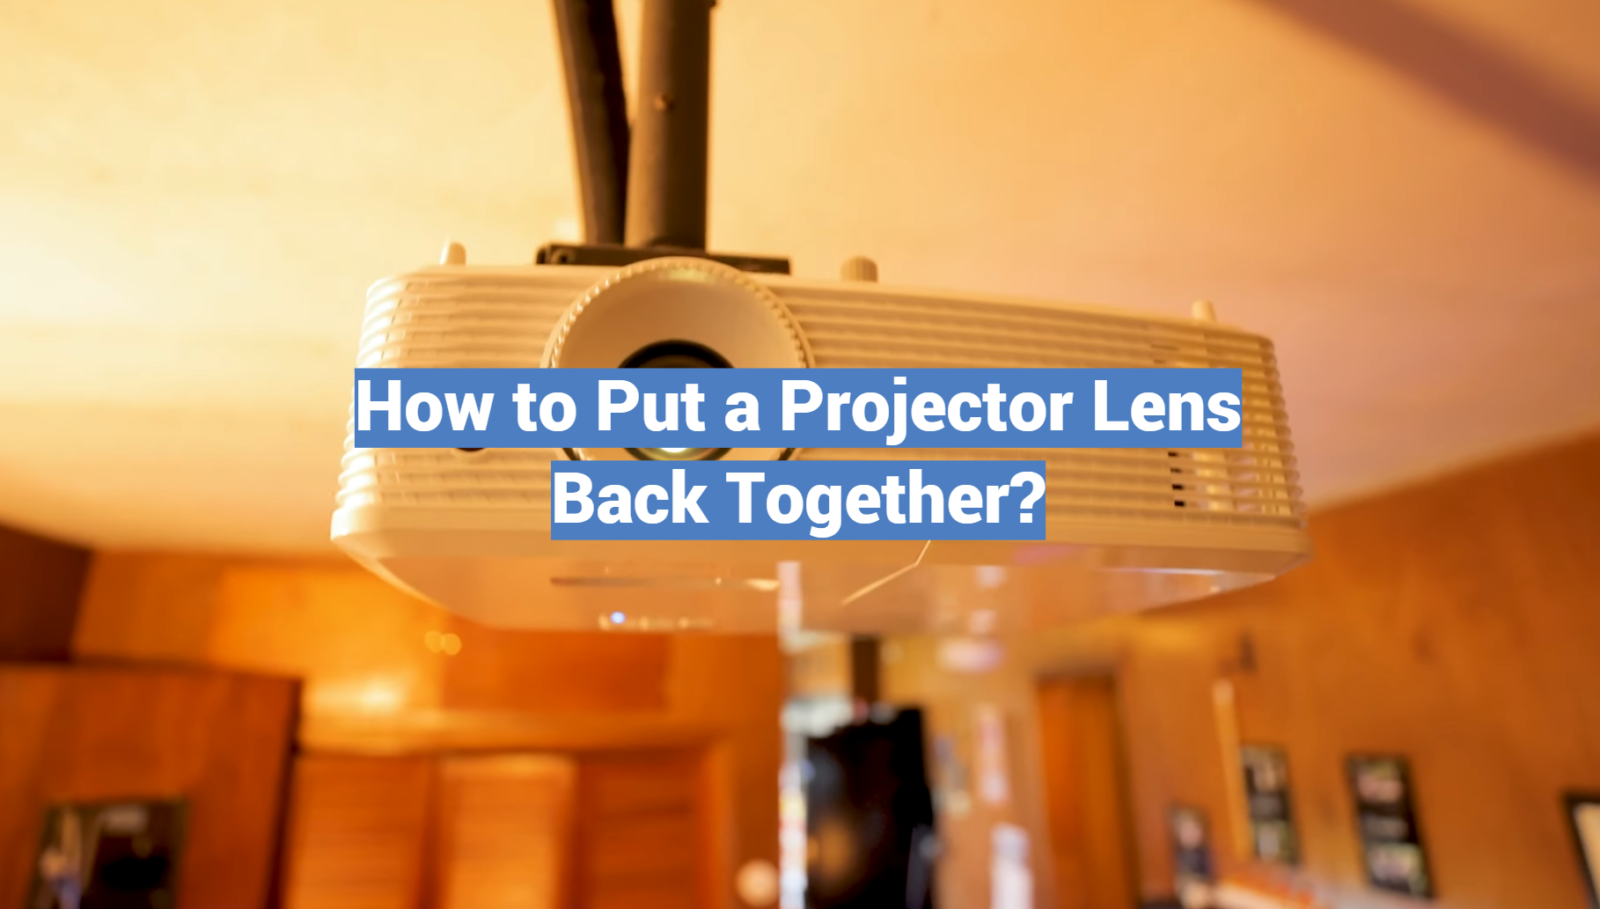 How to Put a Projector Lens Back Together?